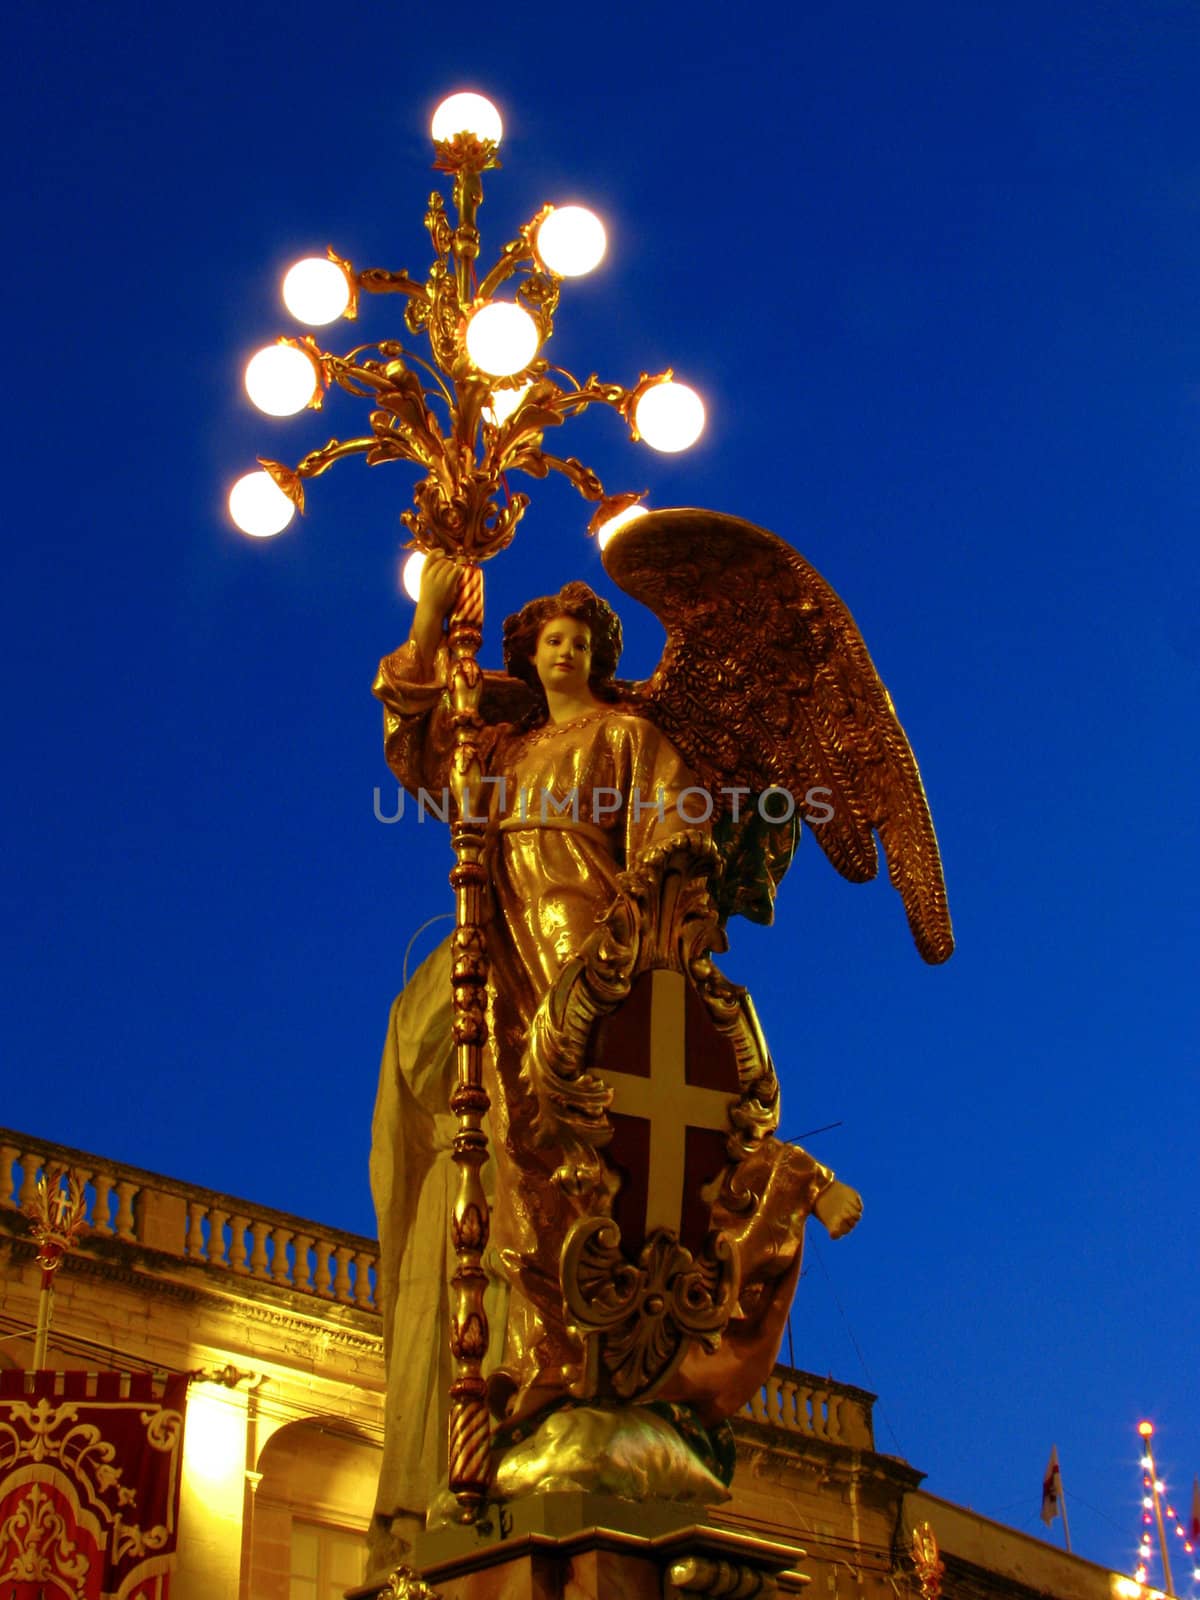 A papier mache angel on display for the occasion of the feast of Saint George in Qormi, Malta.